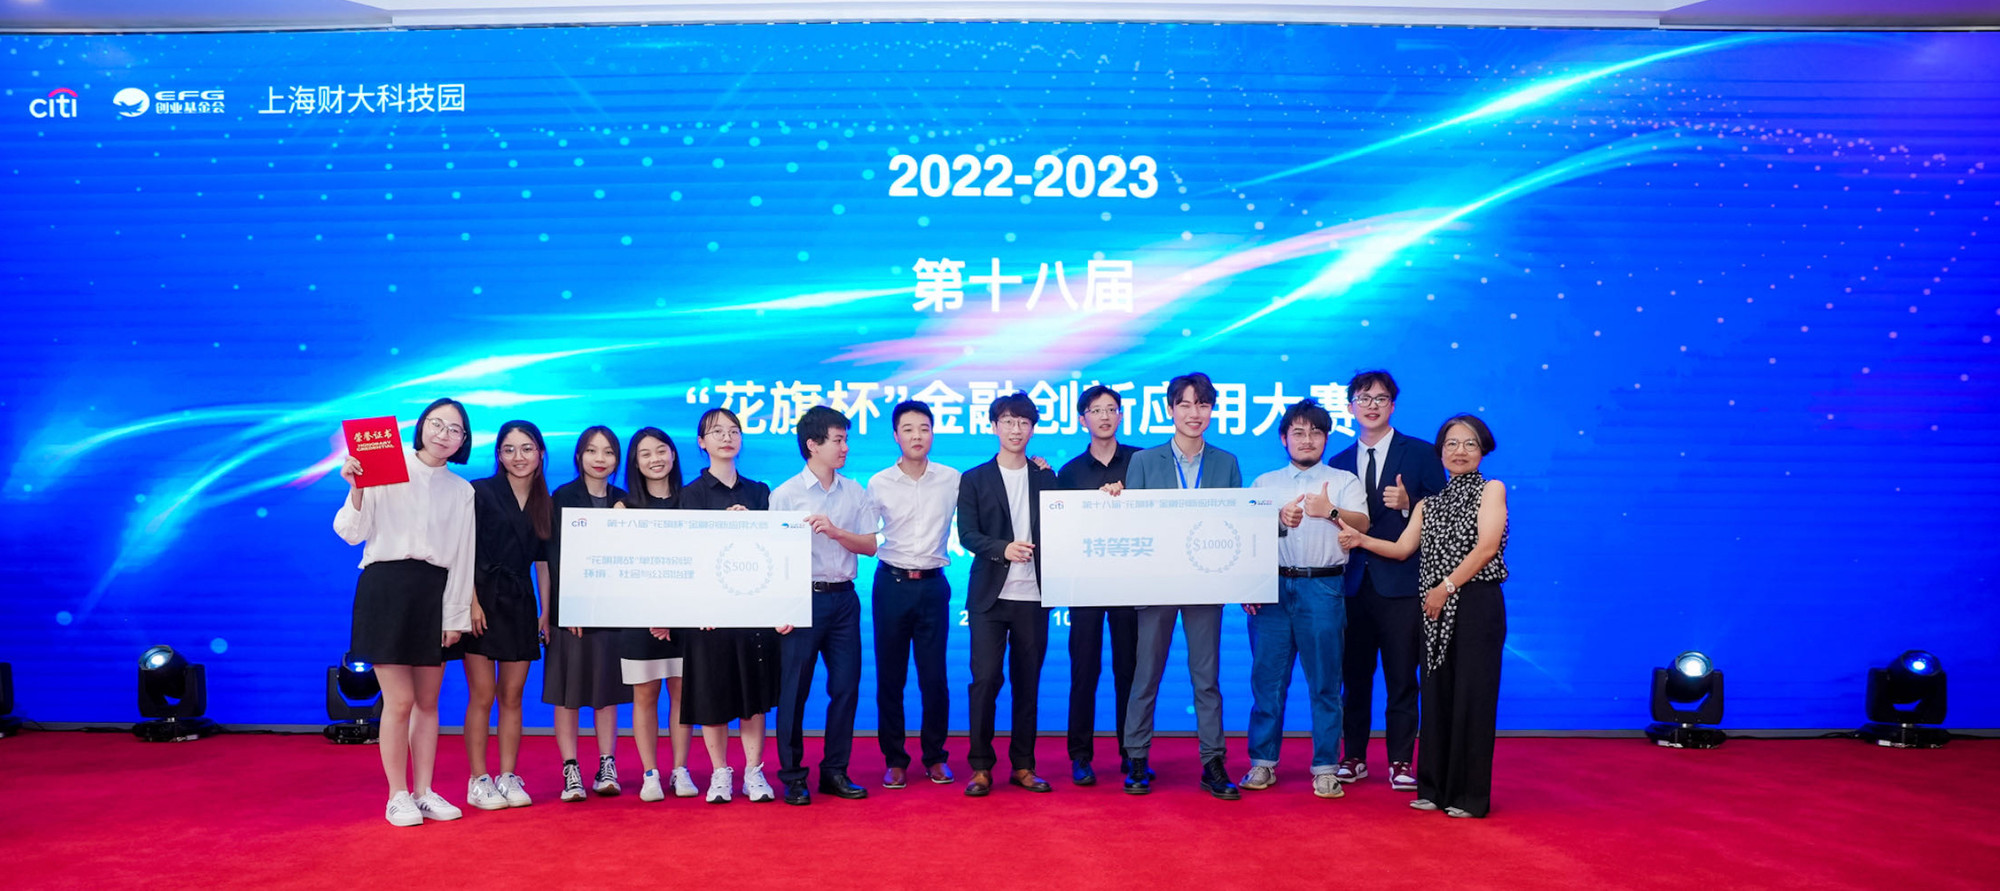 CityU team wins the 18th "Citi Cup" Financial Innovation Application Contest